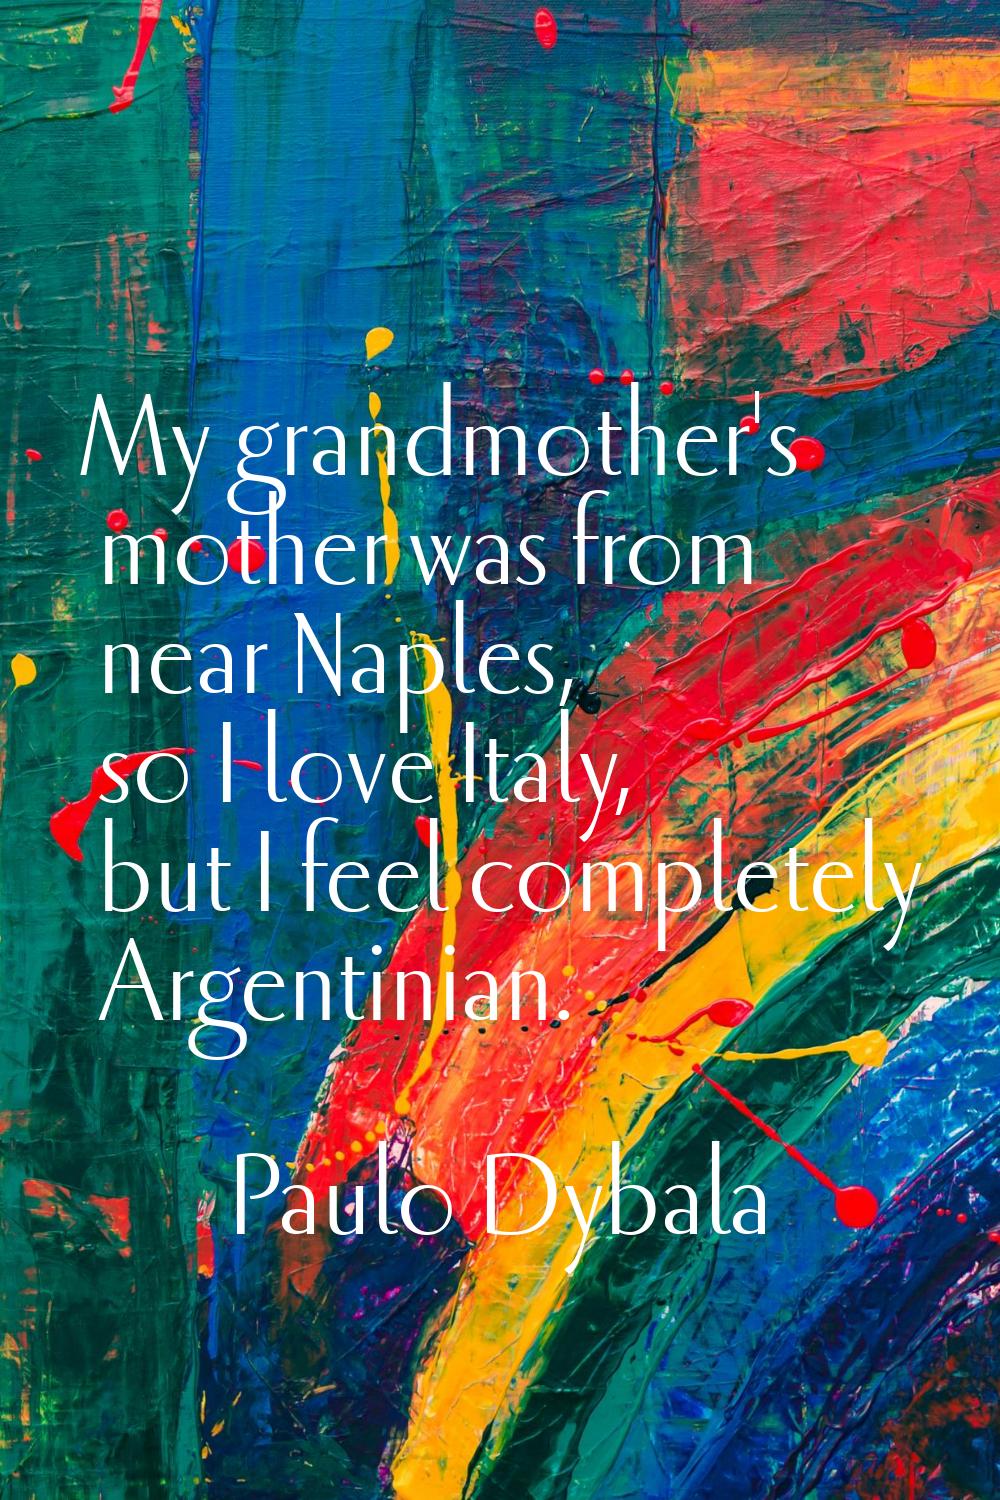 My grandmother's mother was from near Naples, so I love Italy, but I feel completely Argentinian.